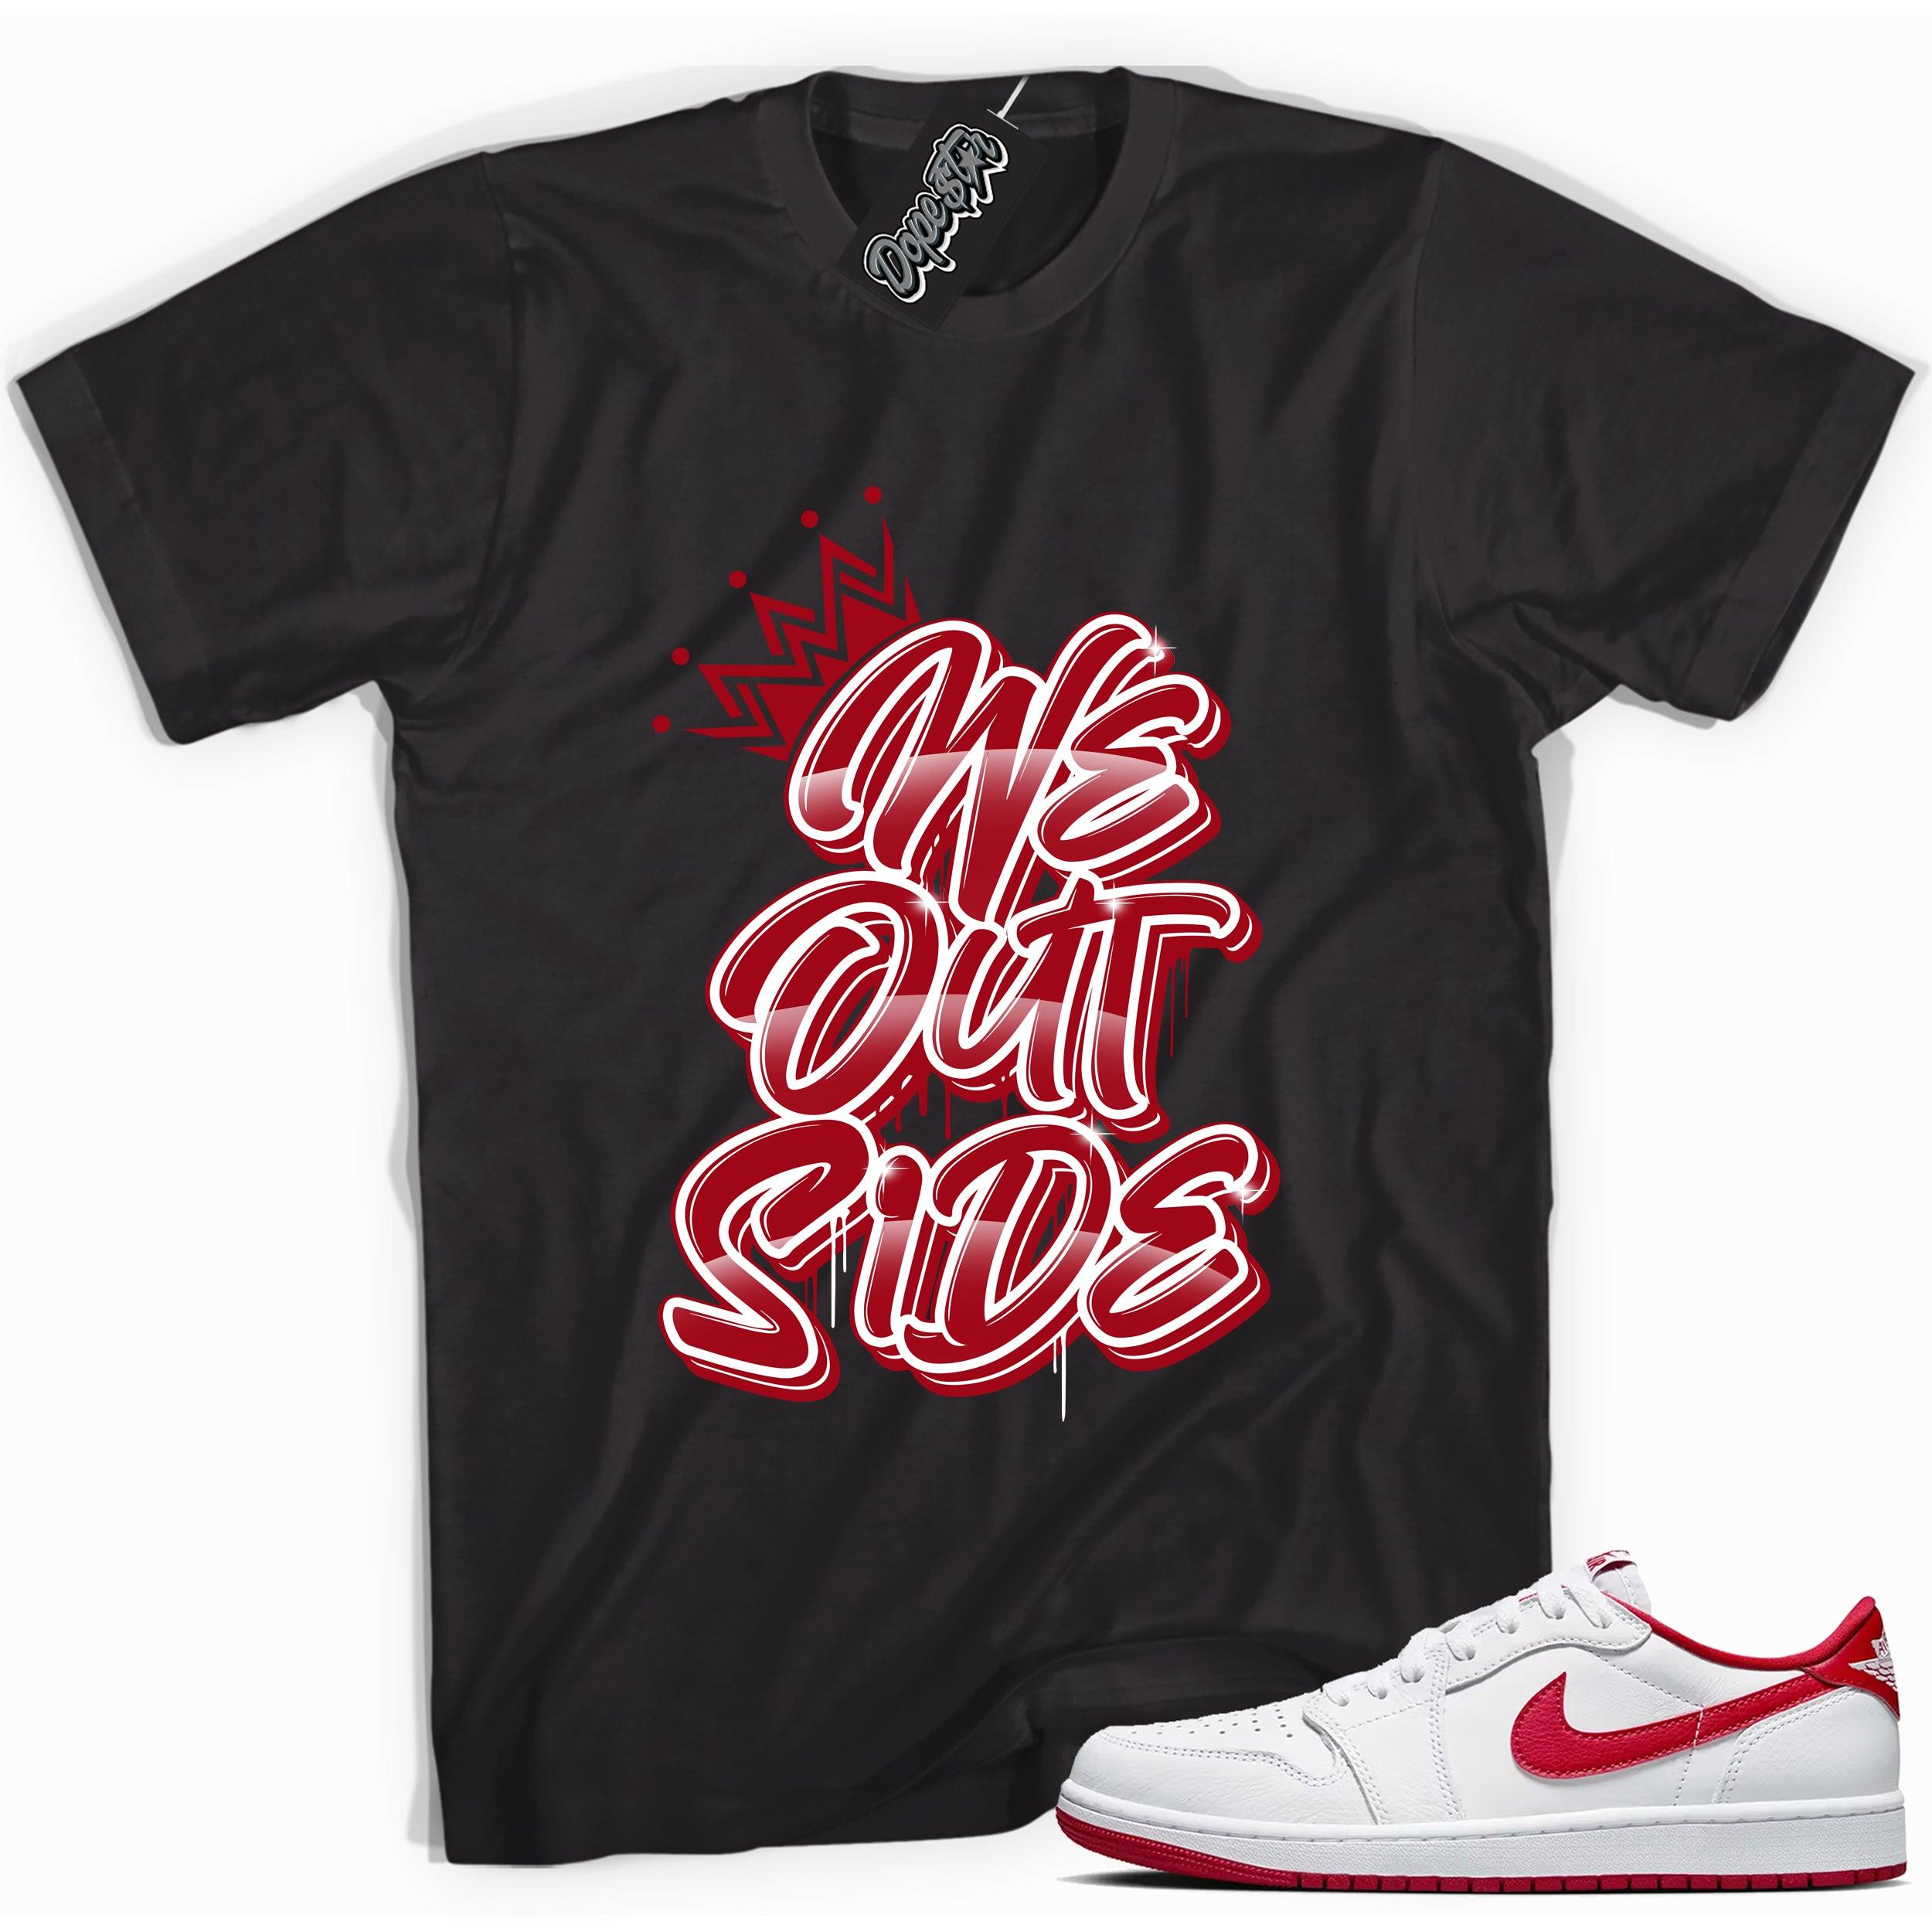 Cool Black graphic tee with “ WE OUTSIDE ” print, that perfectly matches Air Jordan 1 Retro Low OG University Red and white sneakers 